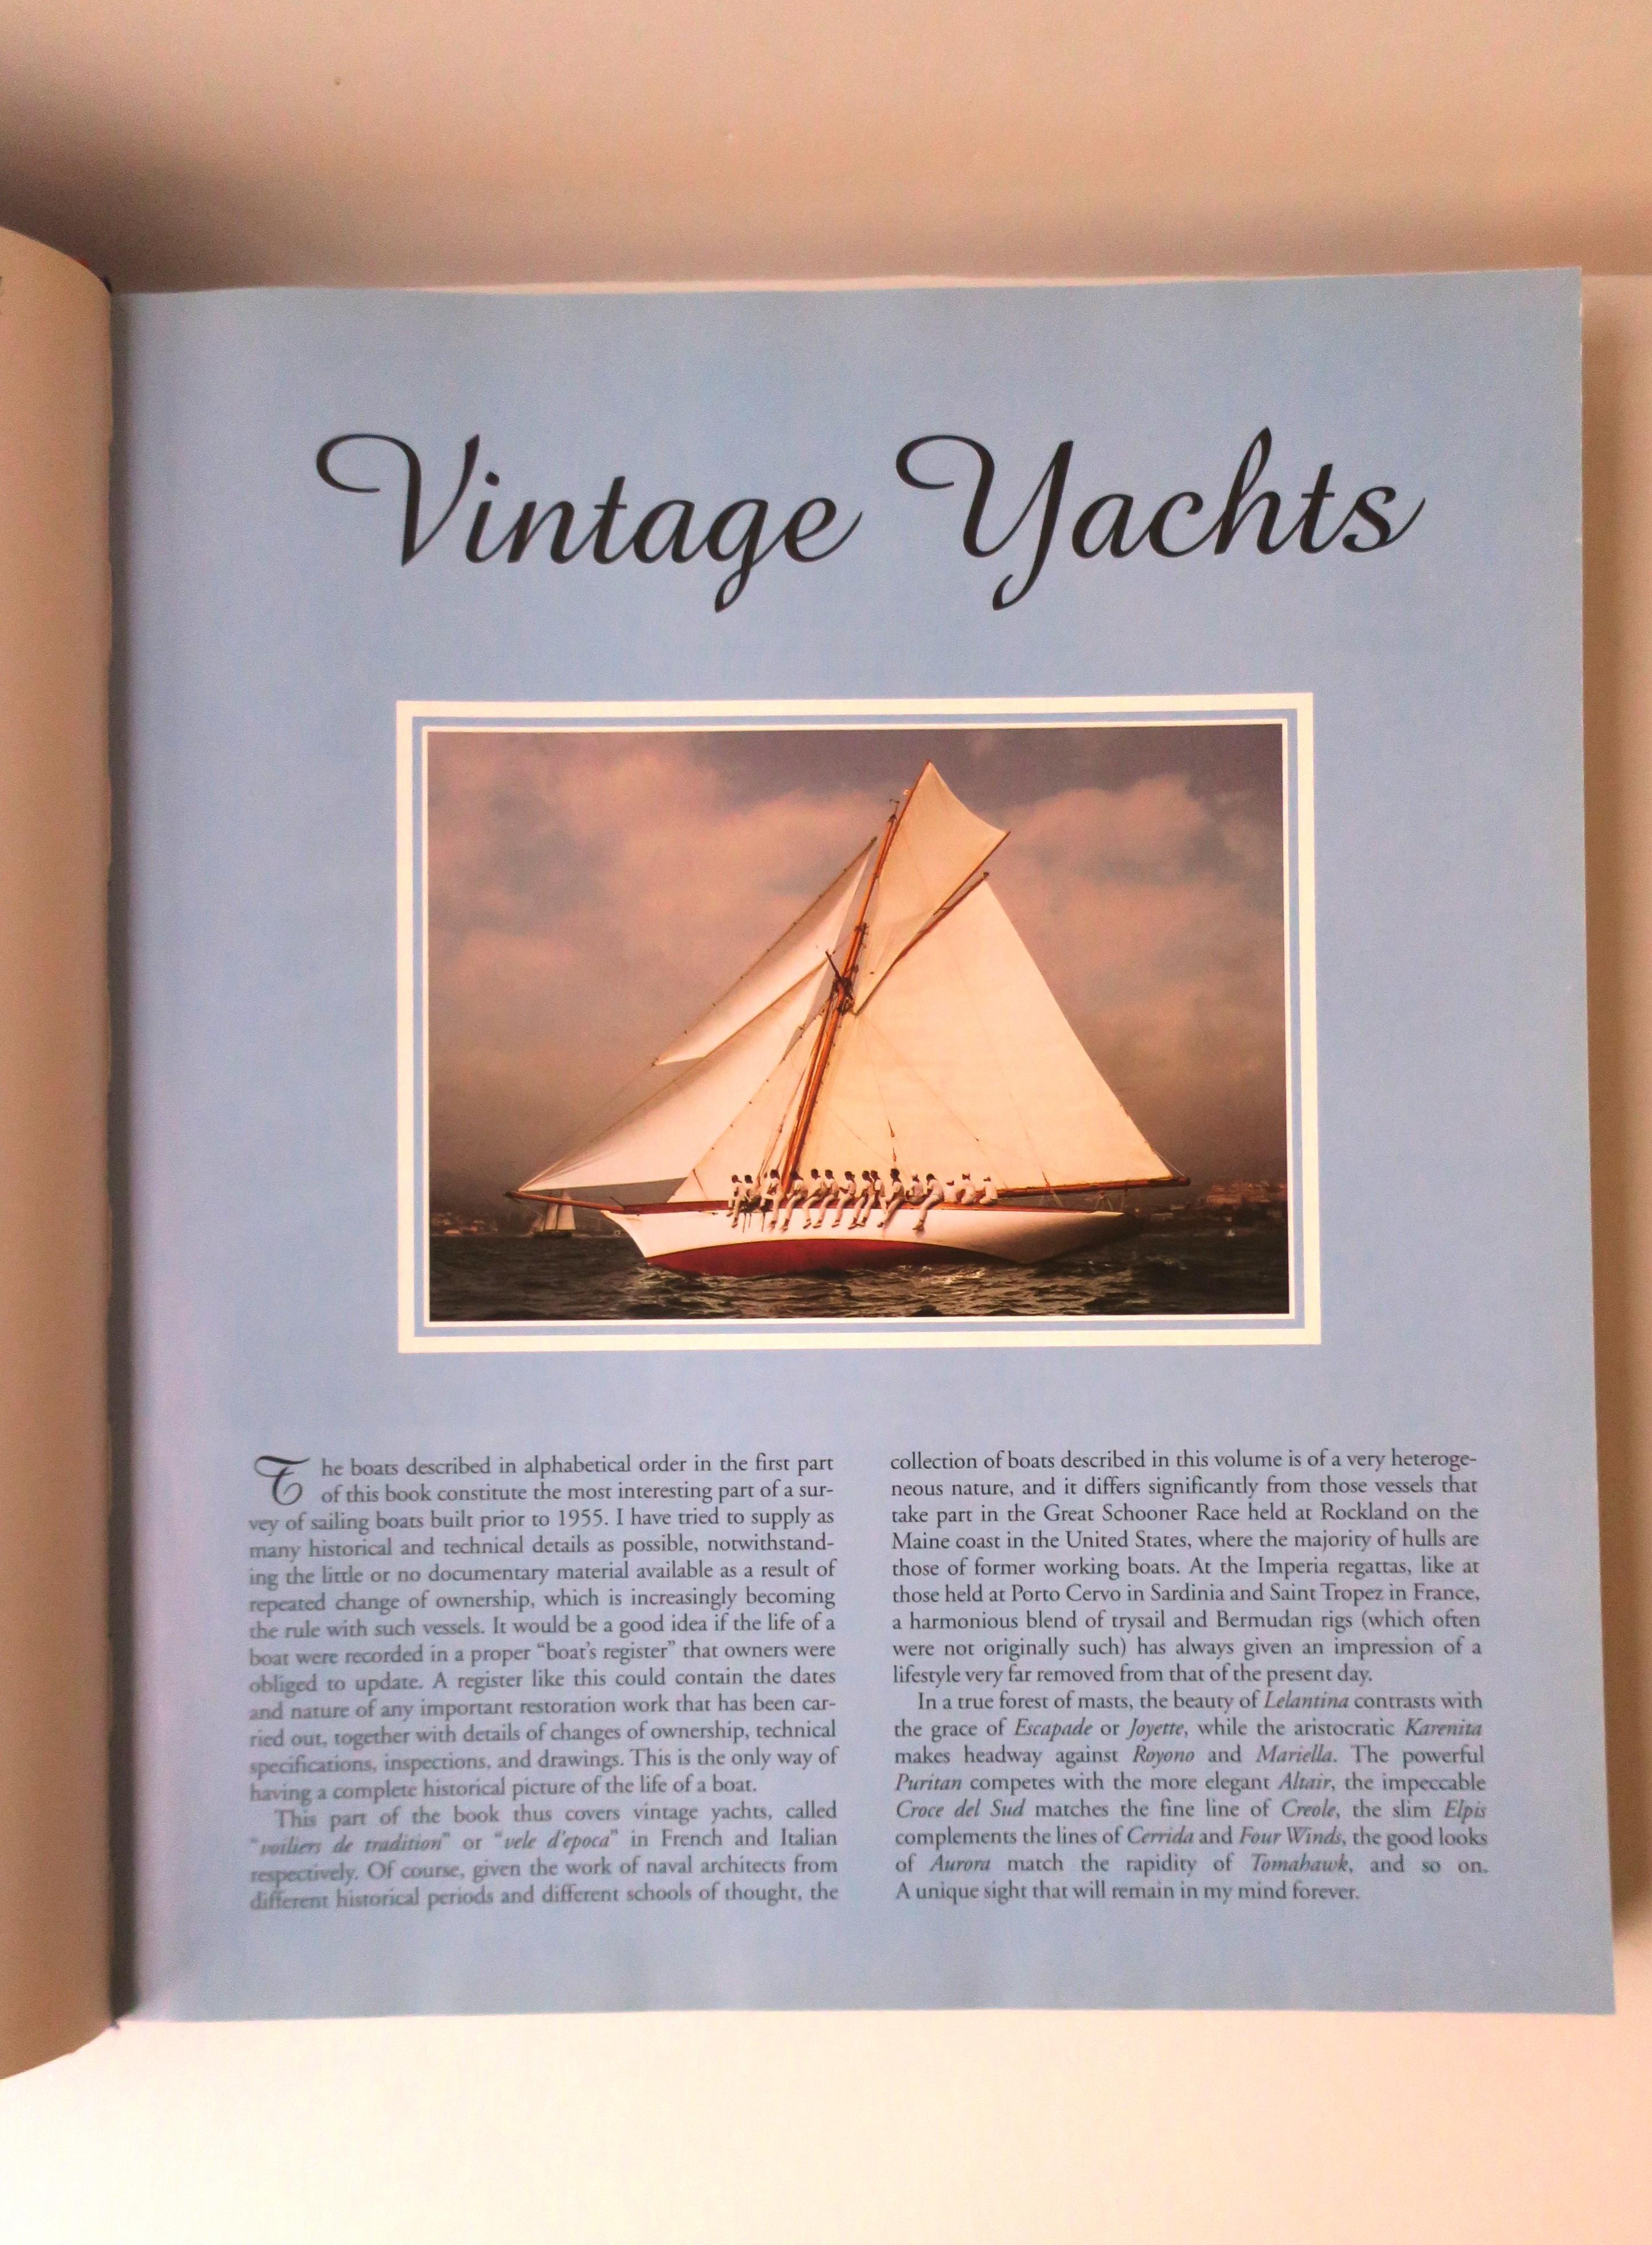 Contemporary Vintage Yachts by Flavio Serafini Coffee Table Book  For Sale